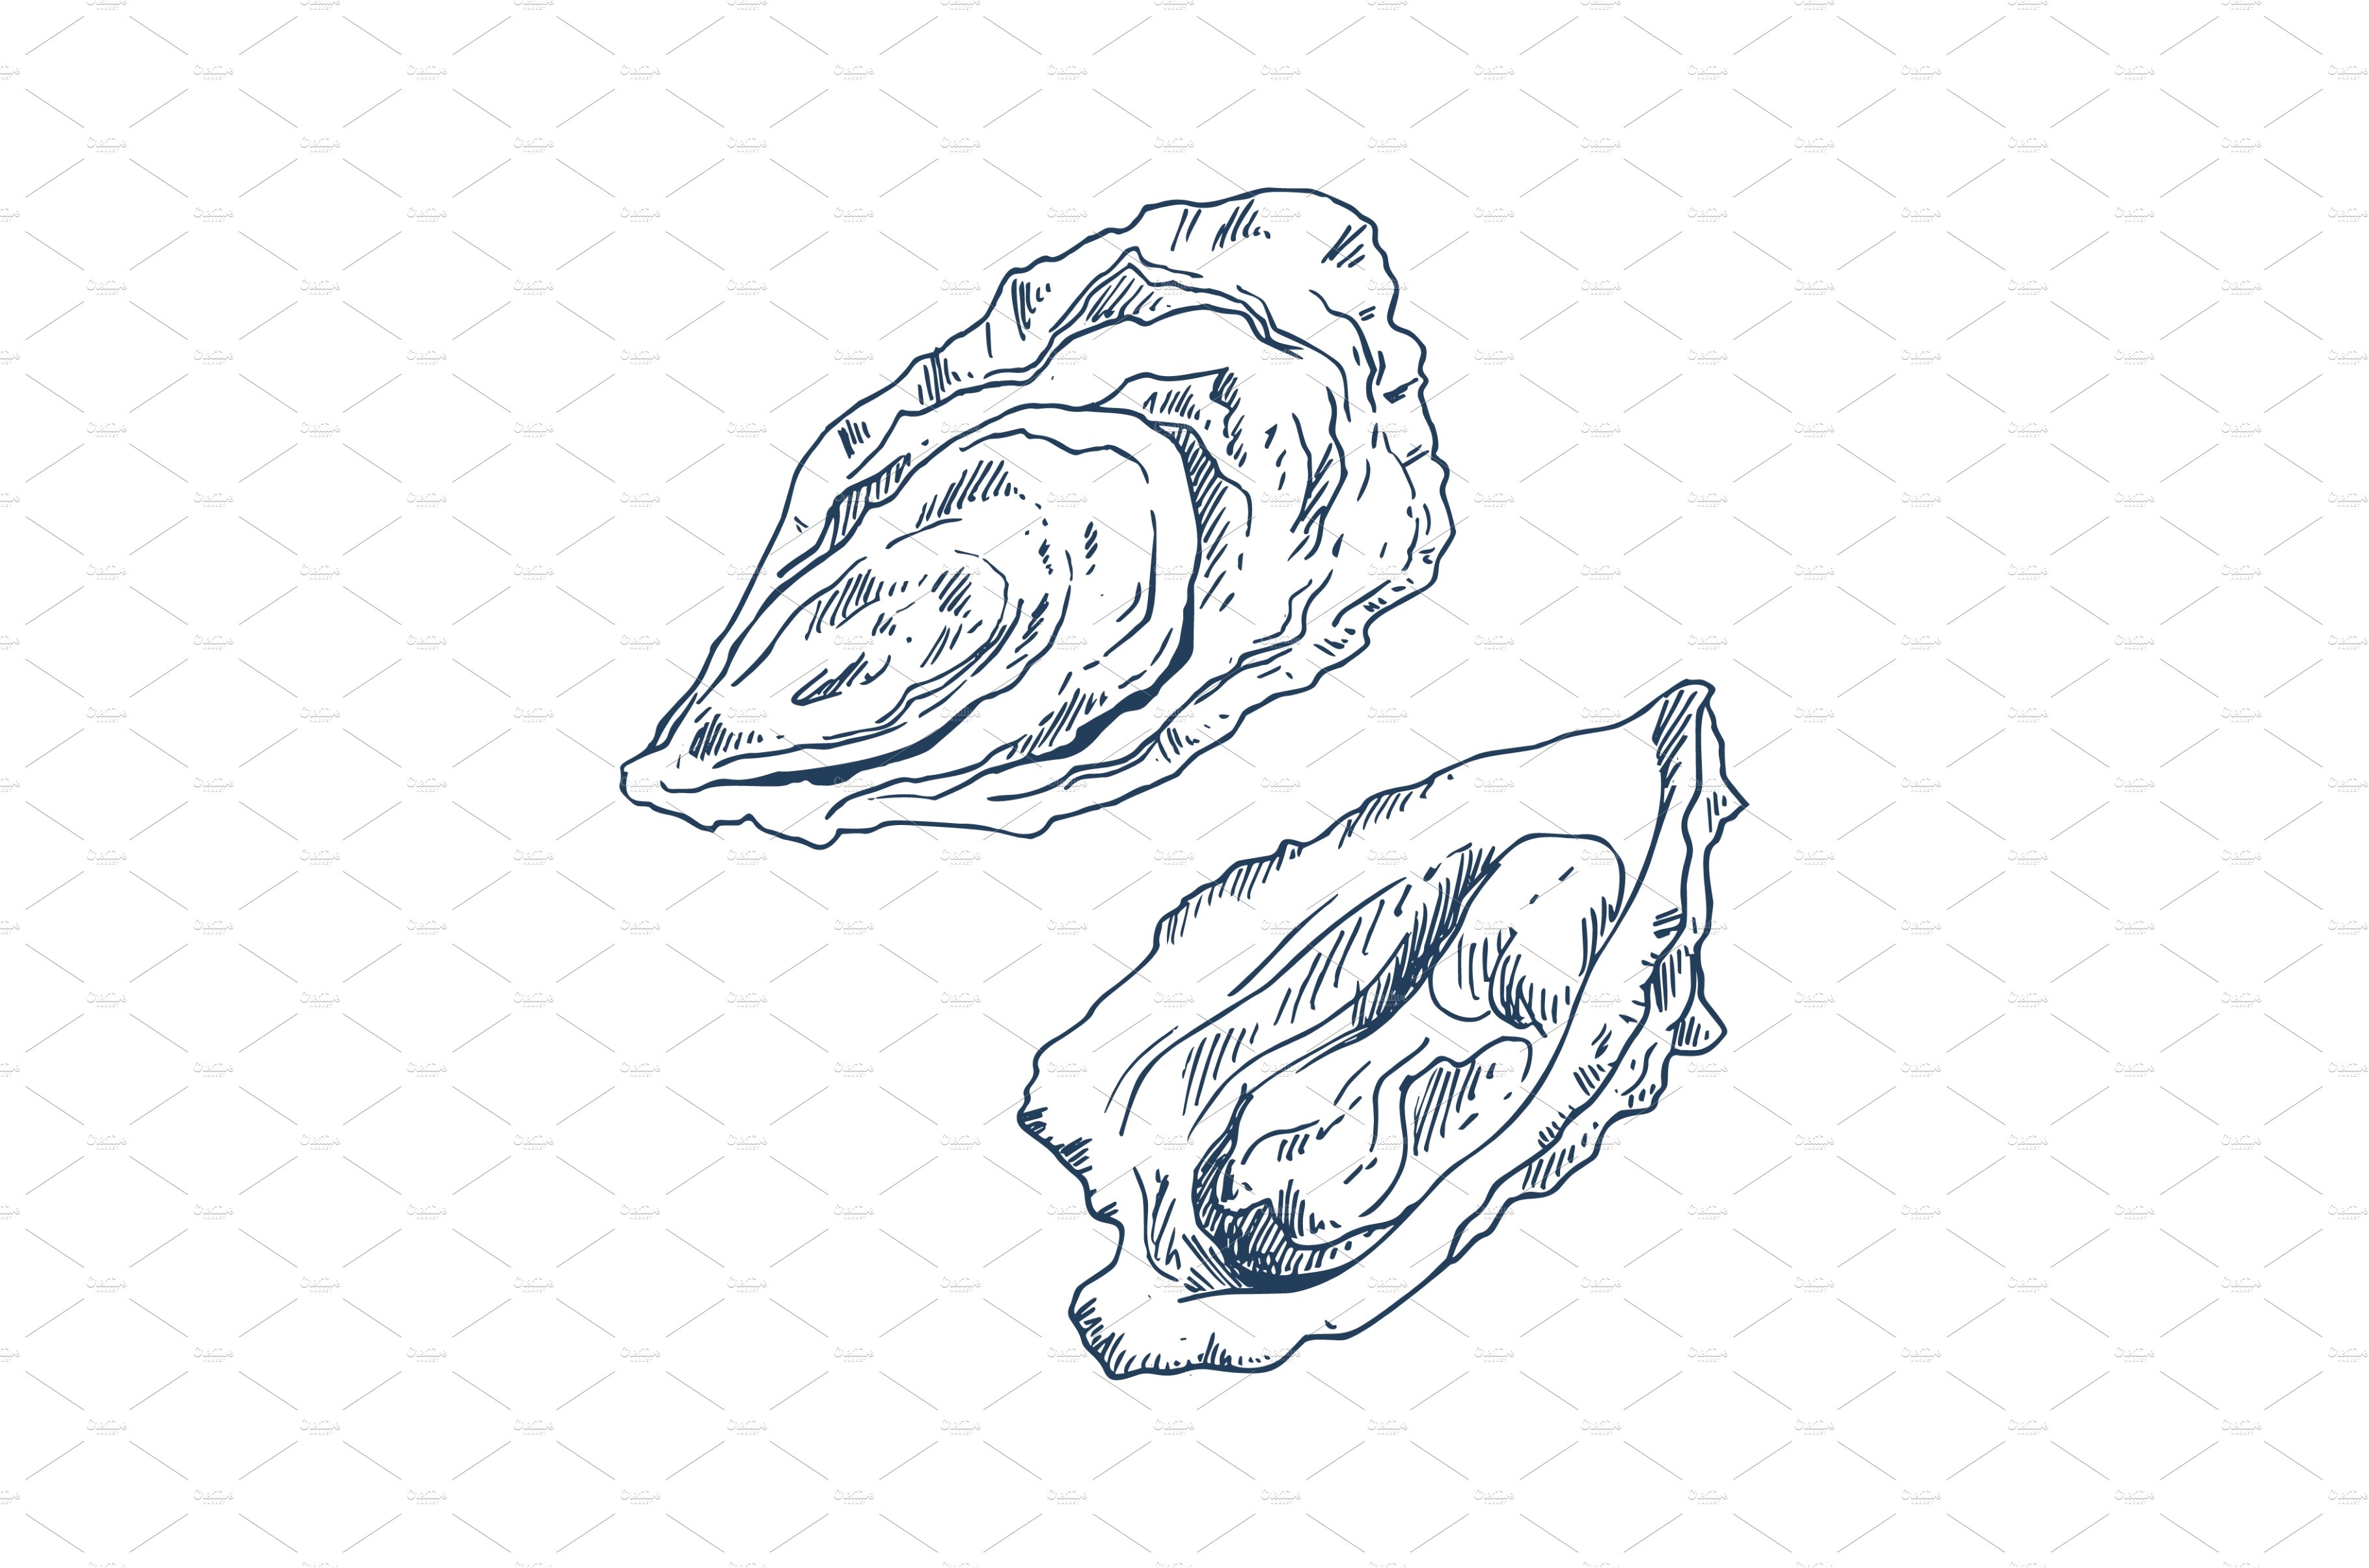 Seafood Delicacy Bivalve Clam Oyster cover image.